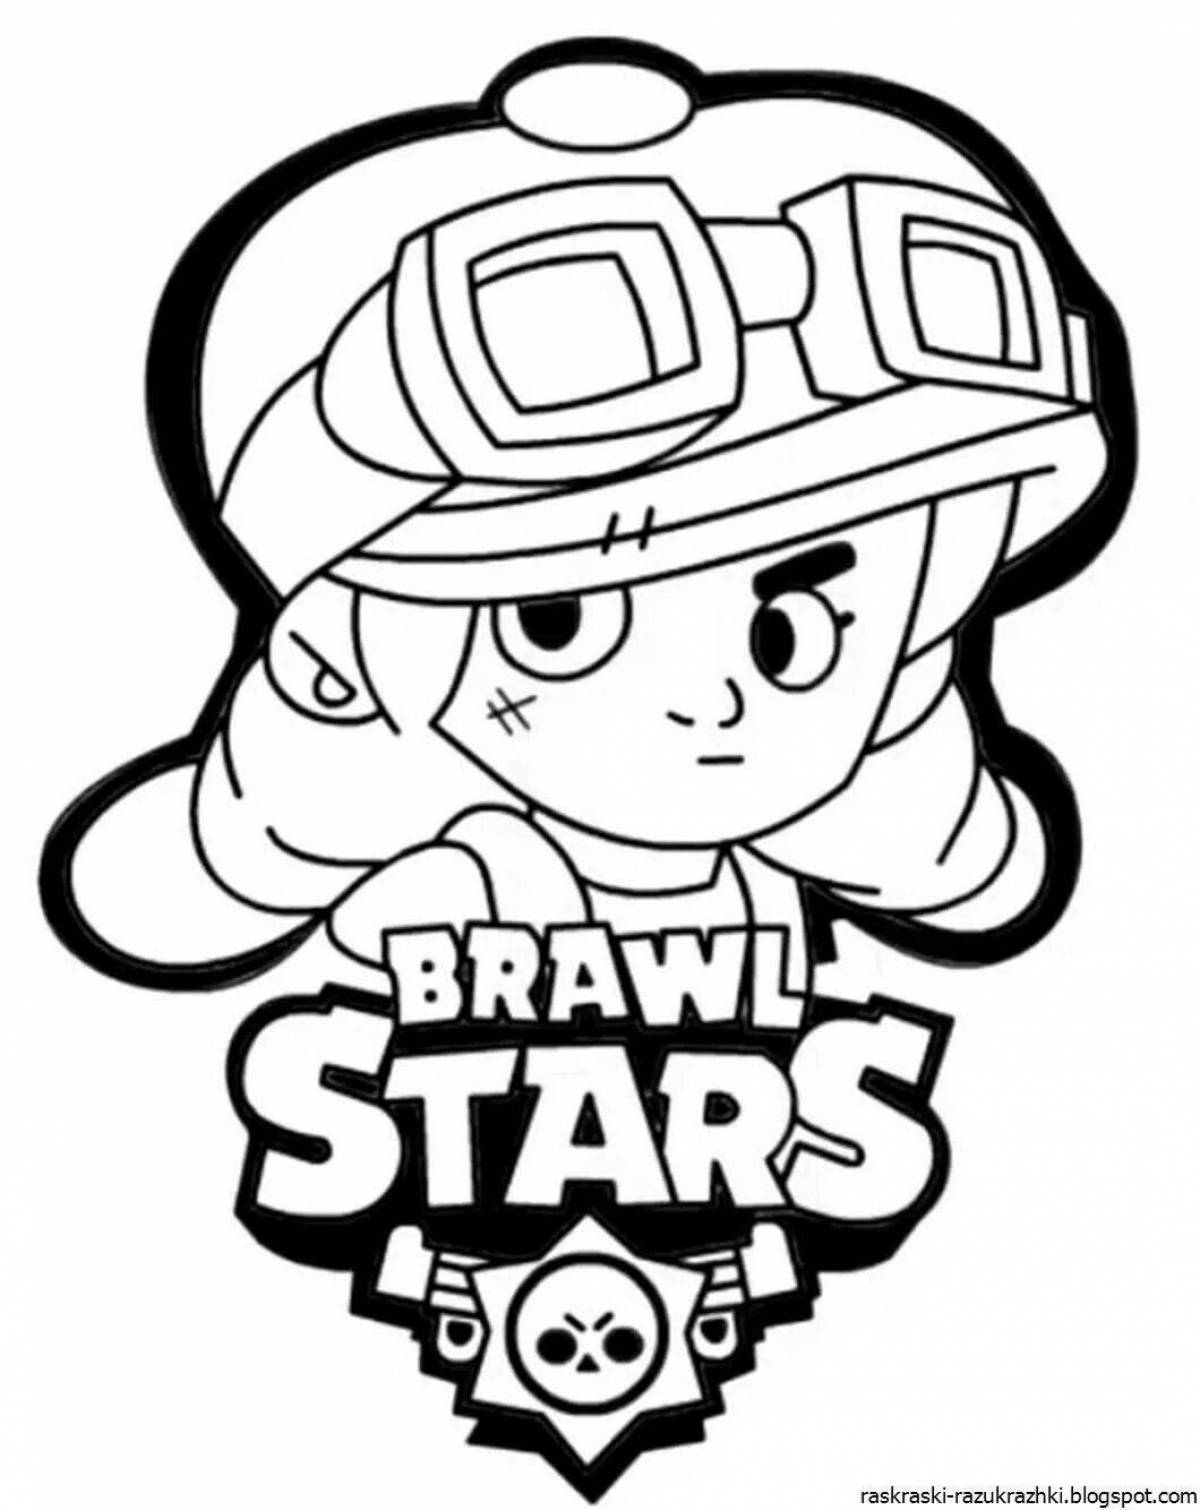 Coloring page brawler icons